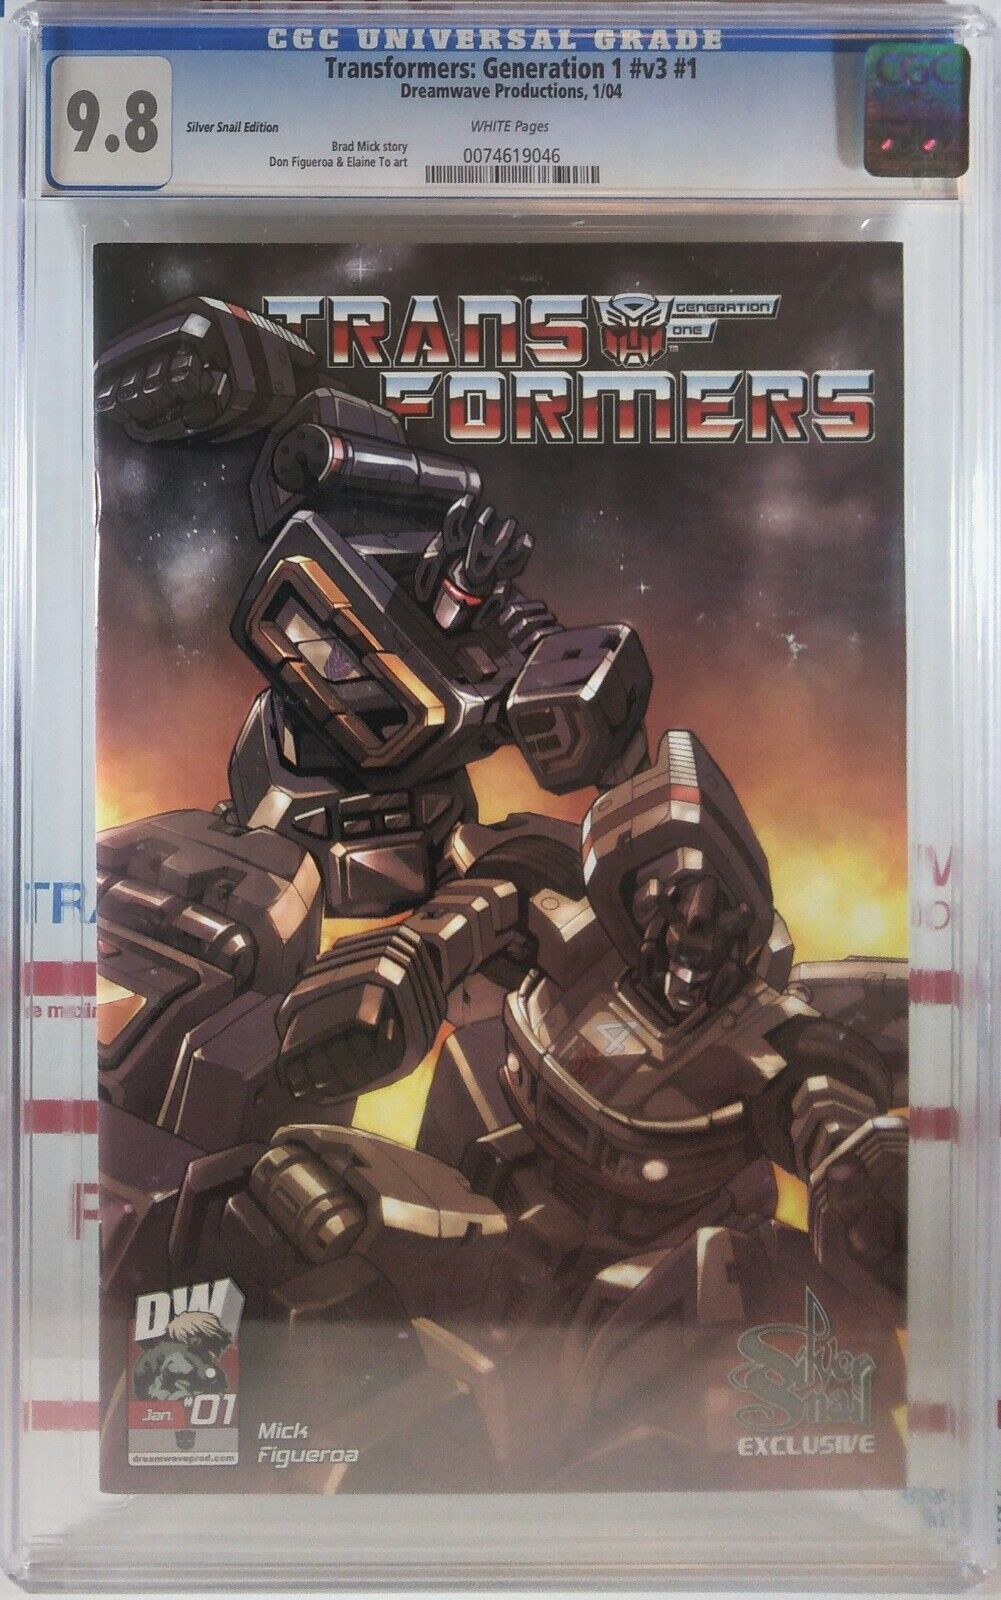 🤖 CGC 9.8 NM/MT TRANSFORMERS GENERATION ONE V3 #1 SILVER SNAIL EDITION VARIANT